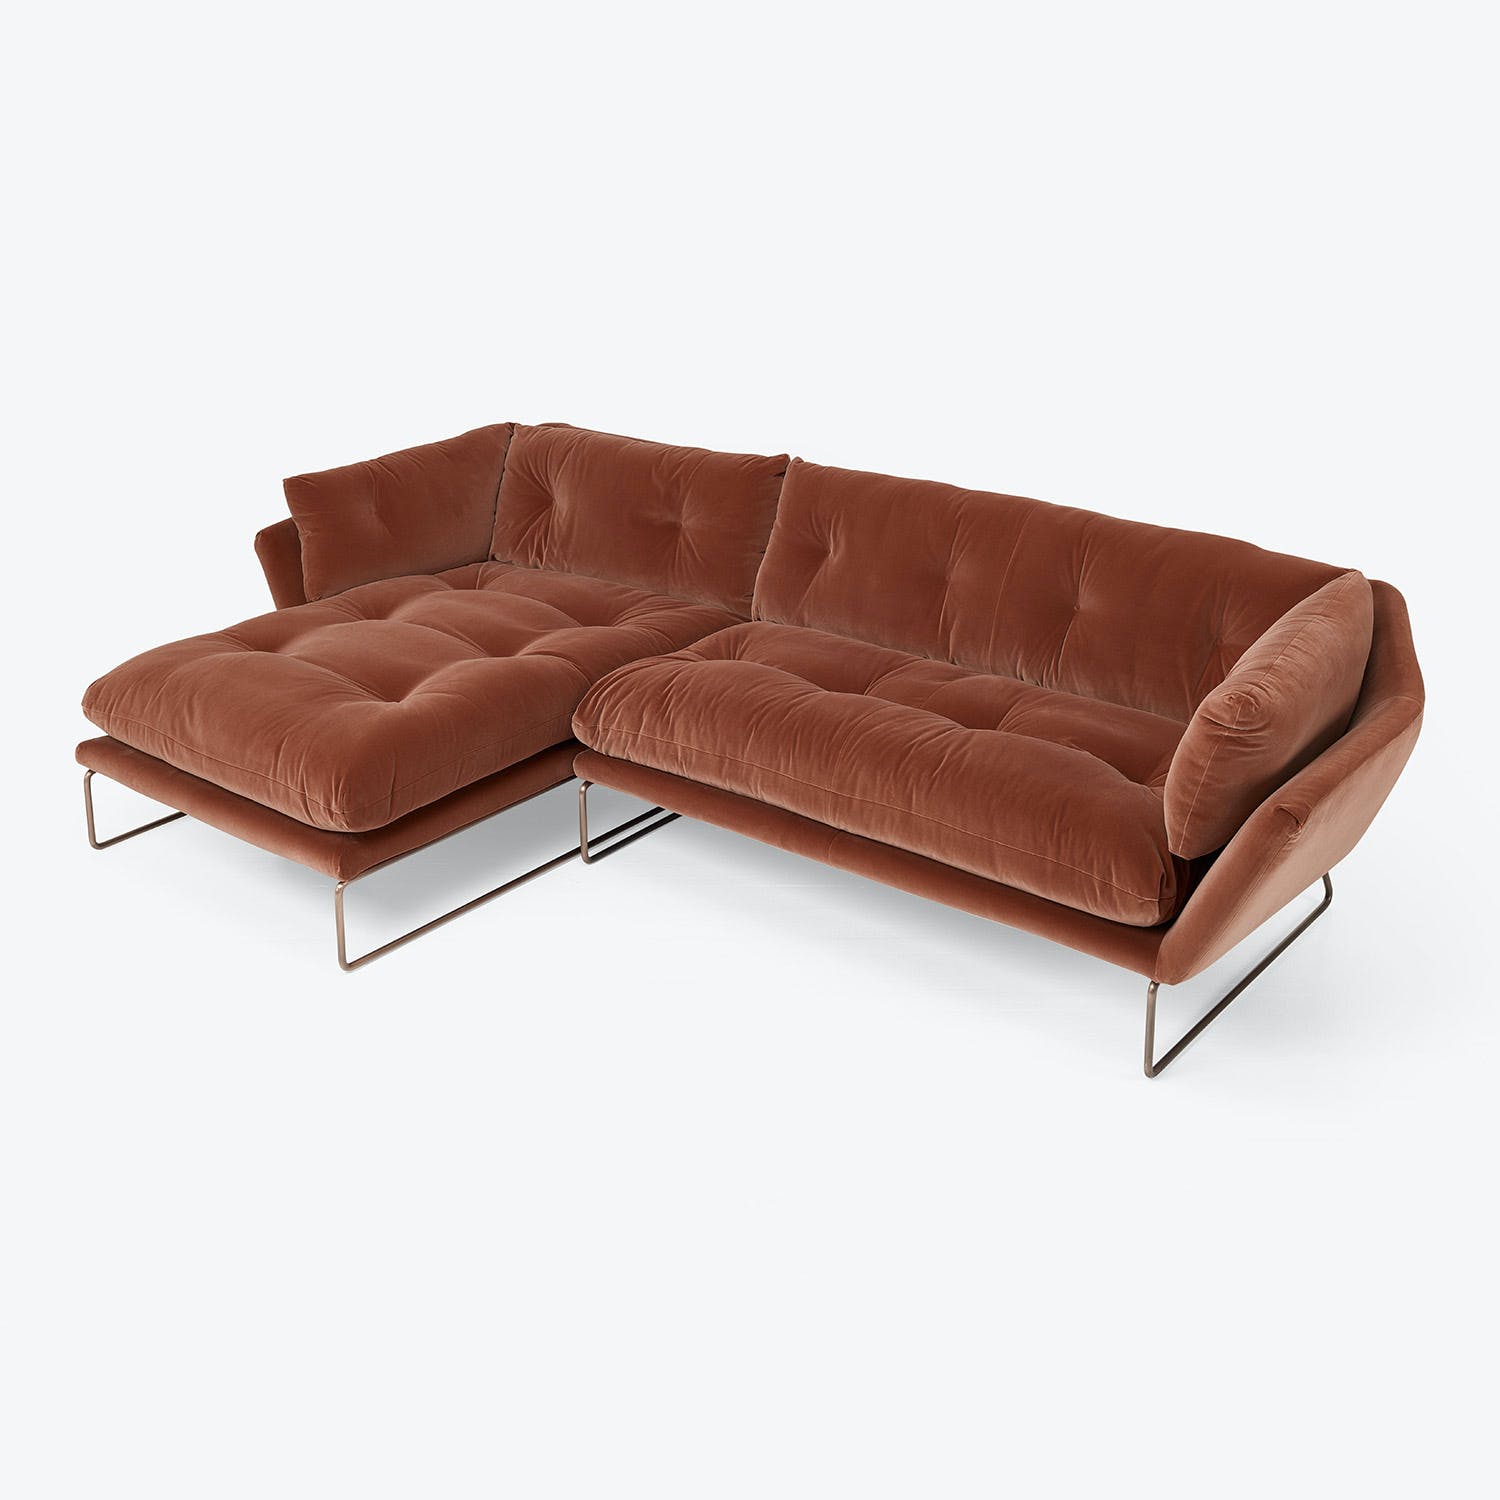 Contemporary sectional sofa with chaise lounge in rich brown fabric.